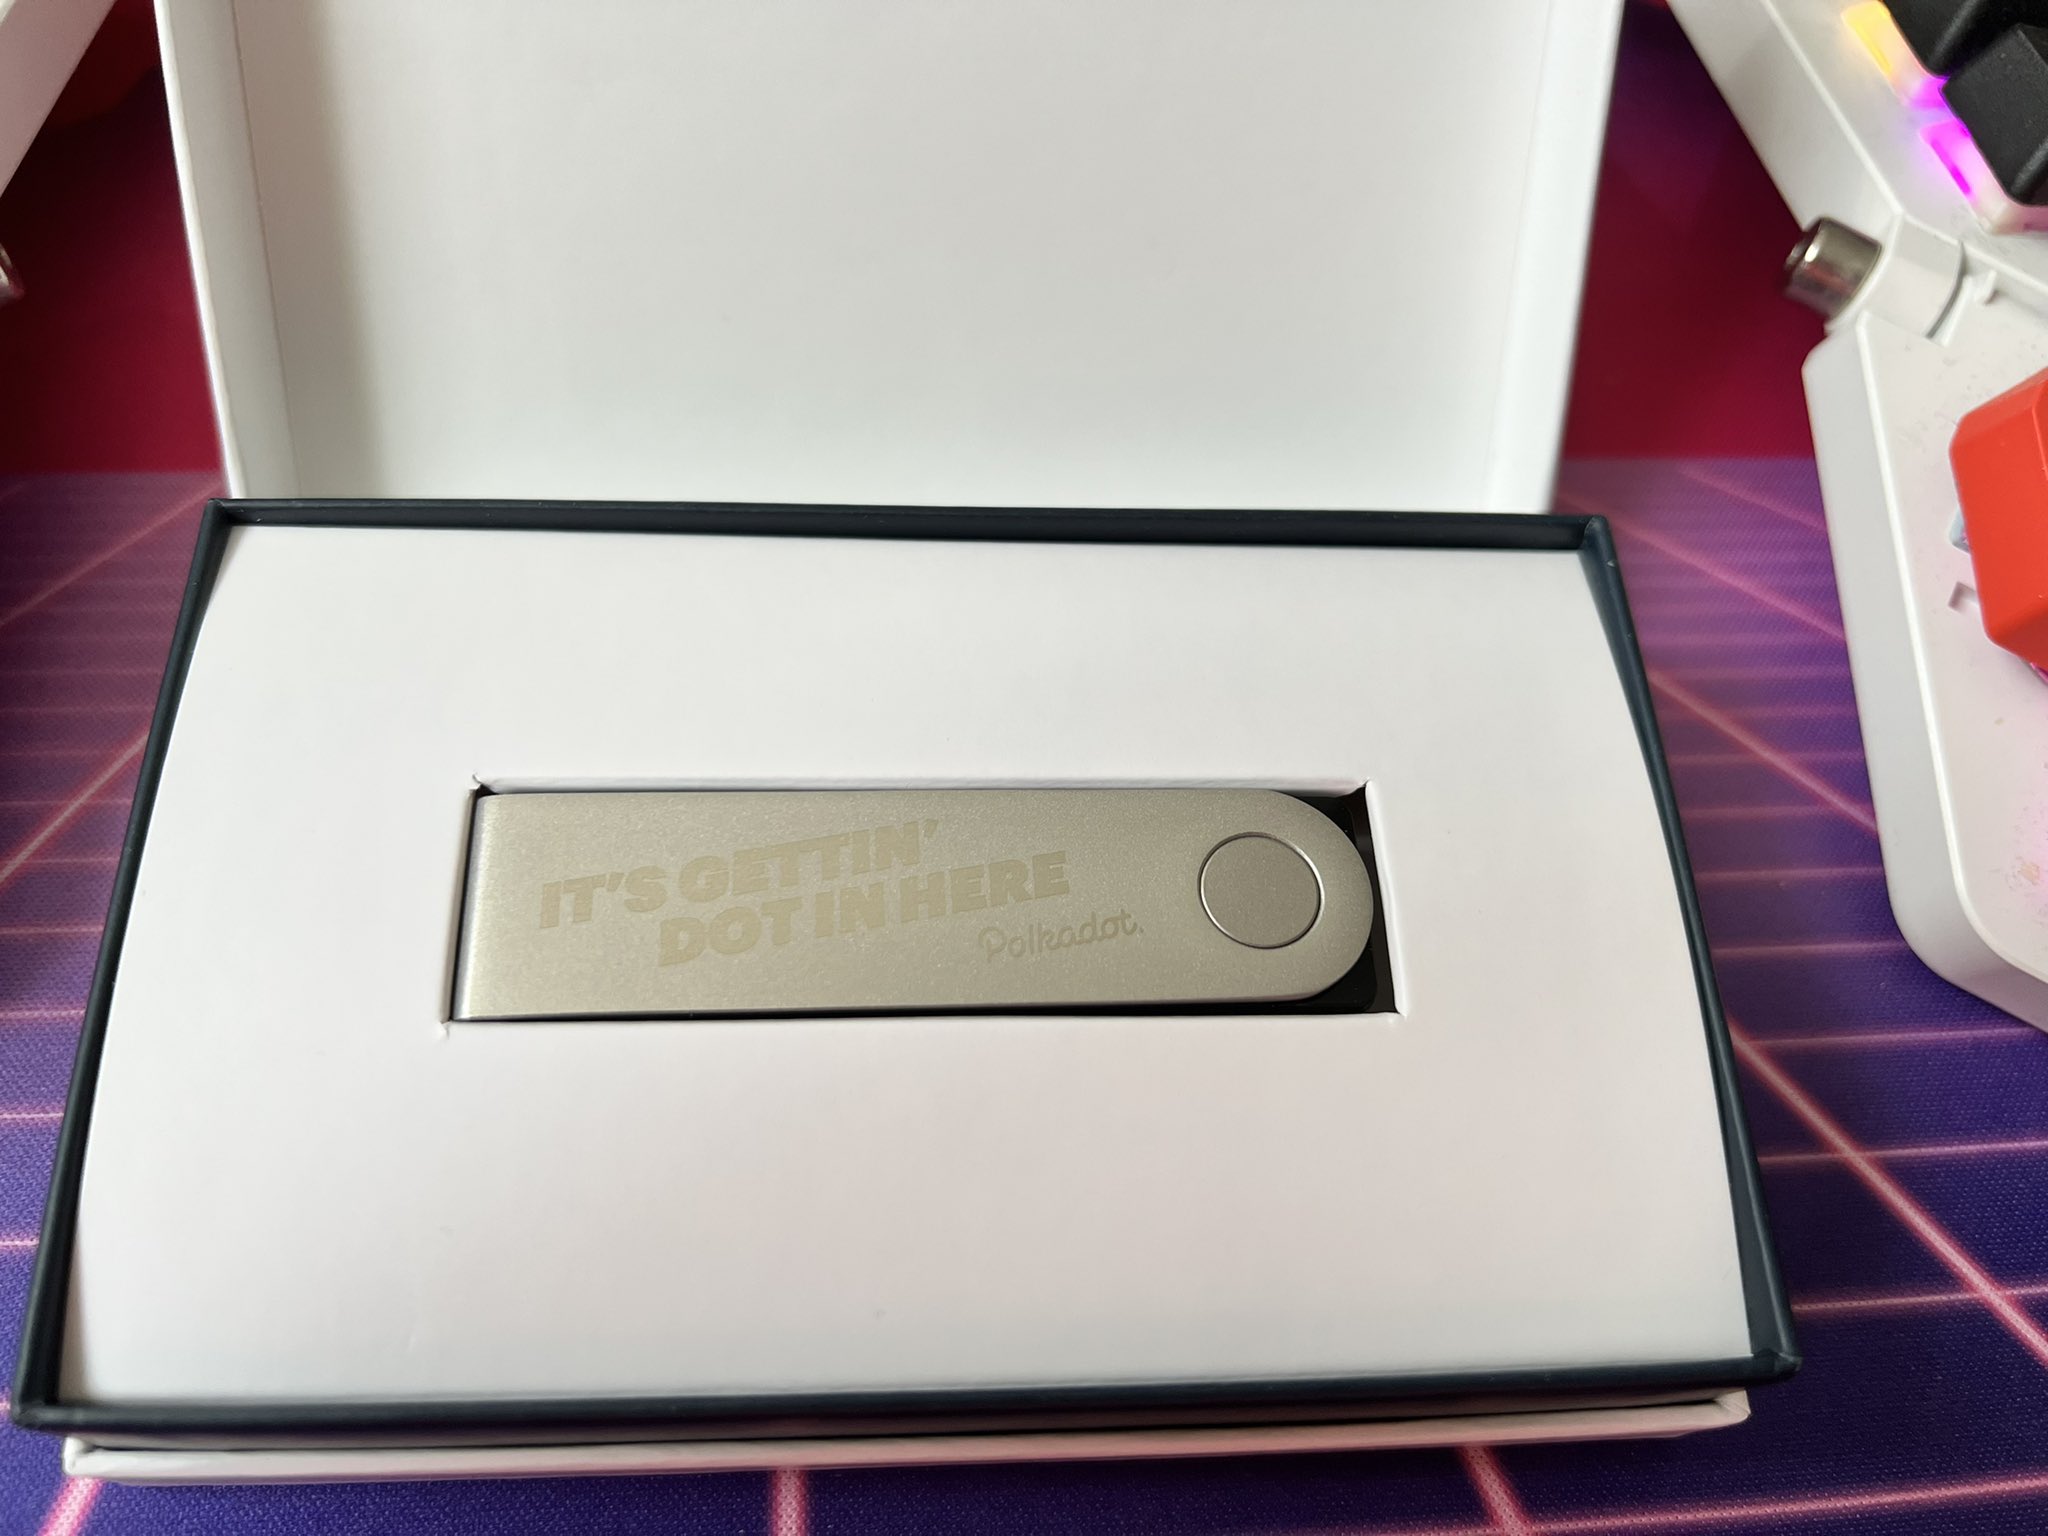 The device, looking vaguely like a USB stick with the engraving "it's getting dot in here" followed by the logo for Polkadot, some kind of blockchain thing